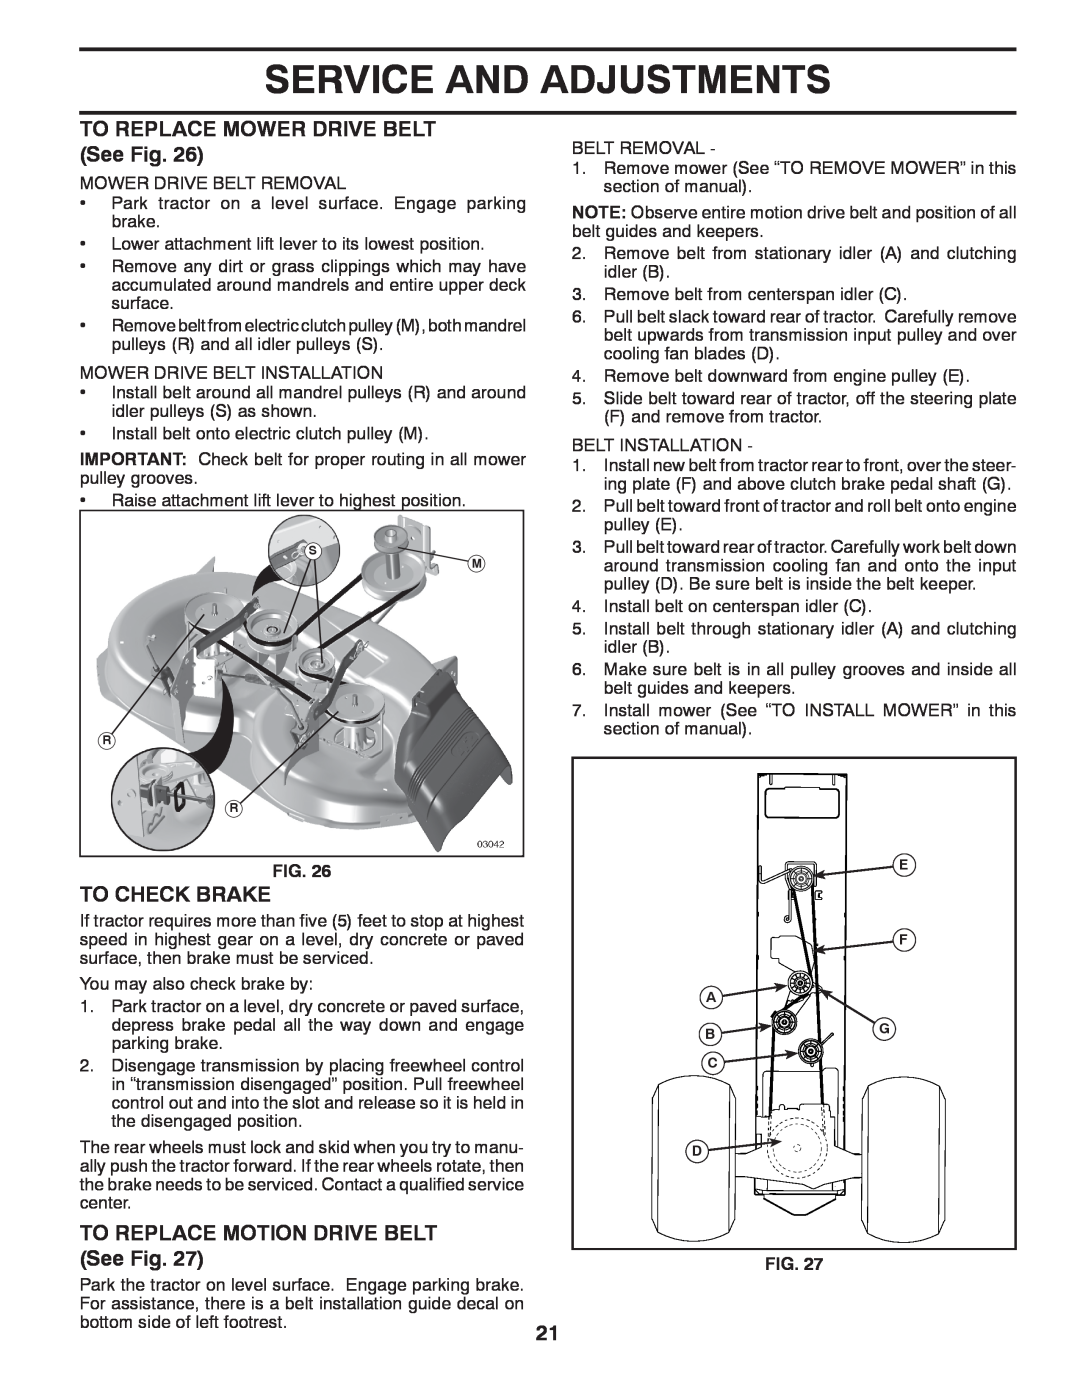 Poulan 96042003700, 411256 manual TO REPLACE MOWER DRIVE BELT See Fig, To Check Brake, TO REPLACE MOTION DRIVE BELT See Fig 